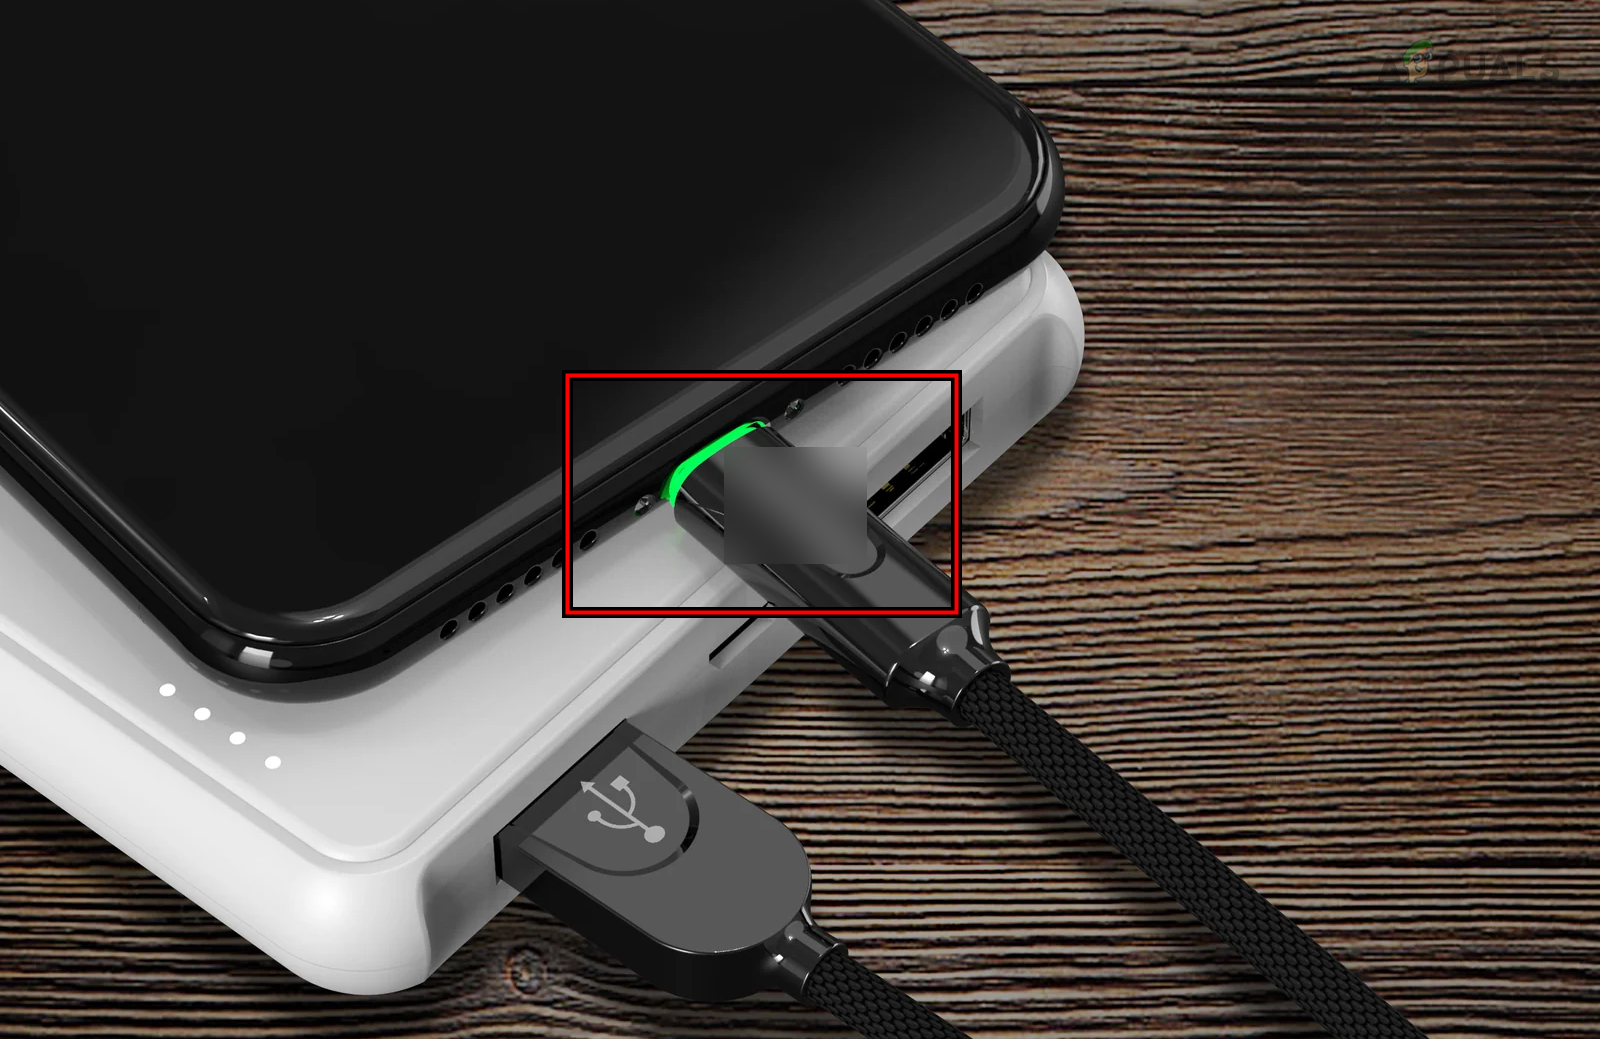 Disconnect the Charging Cable of the iPhone After Putting it on the Wireless Charger